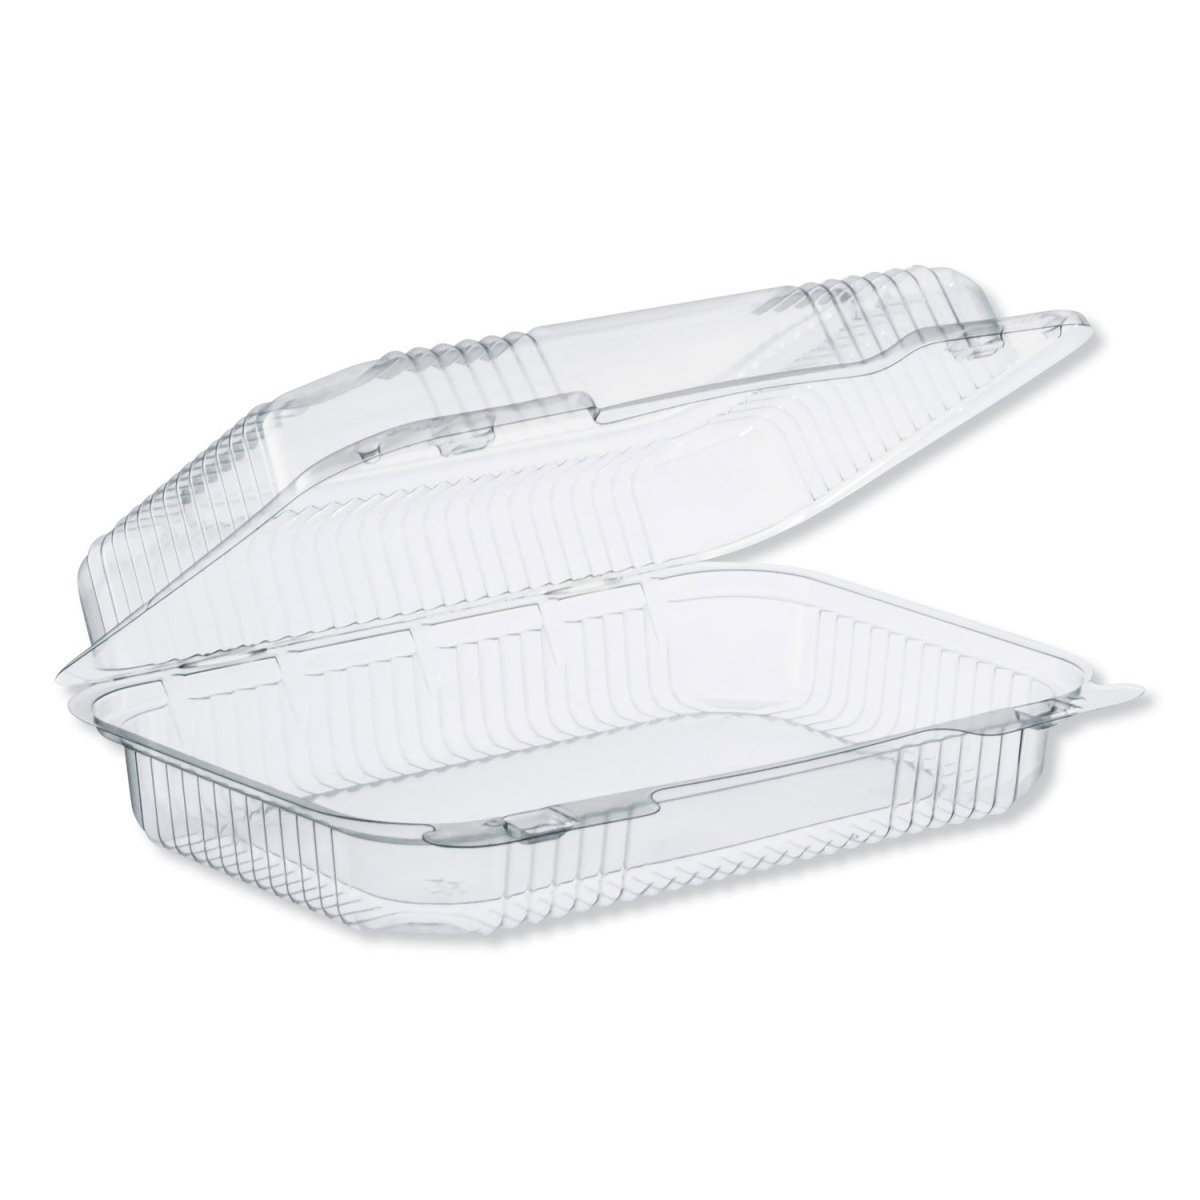 C32ut1 32 Oz Staylock Clear Hinged Lid Container, Clear - 6.8 X 9.4 X 2.6 In. - 250 Per Case